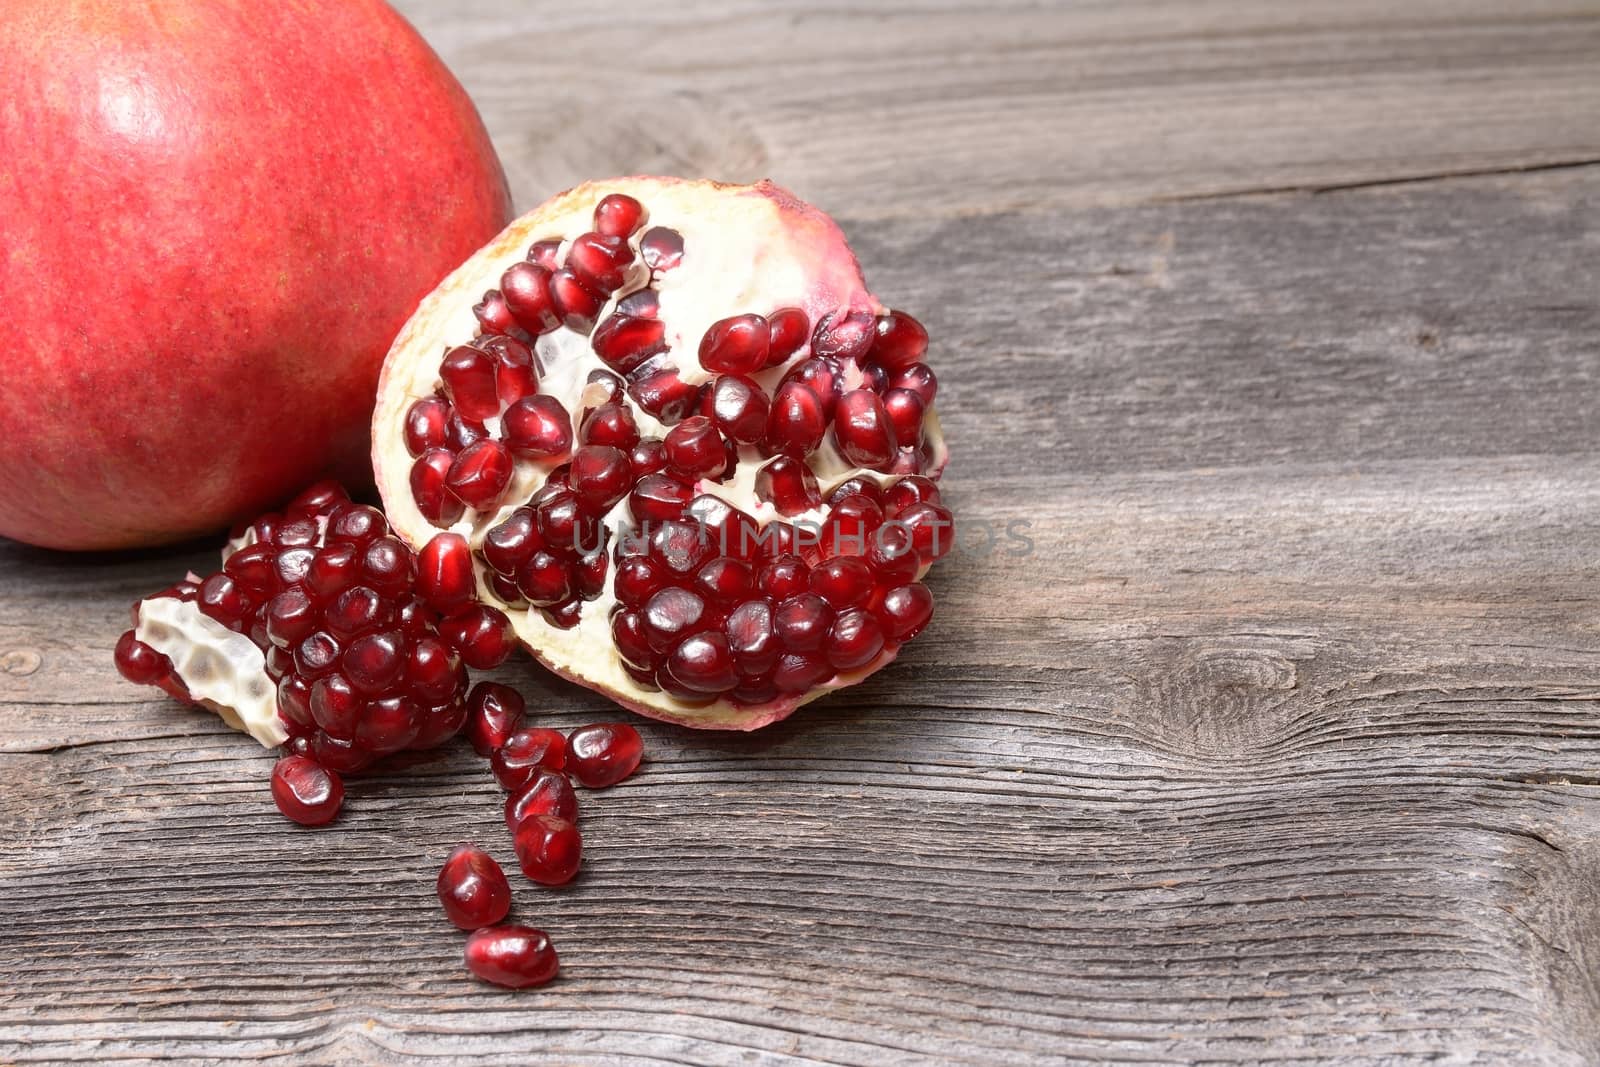 Red juicy pomegranate, on dark rustic wooden table by comet